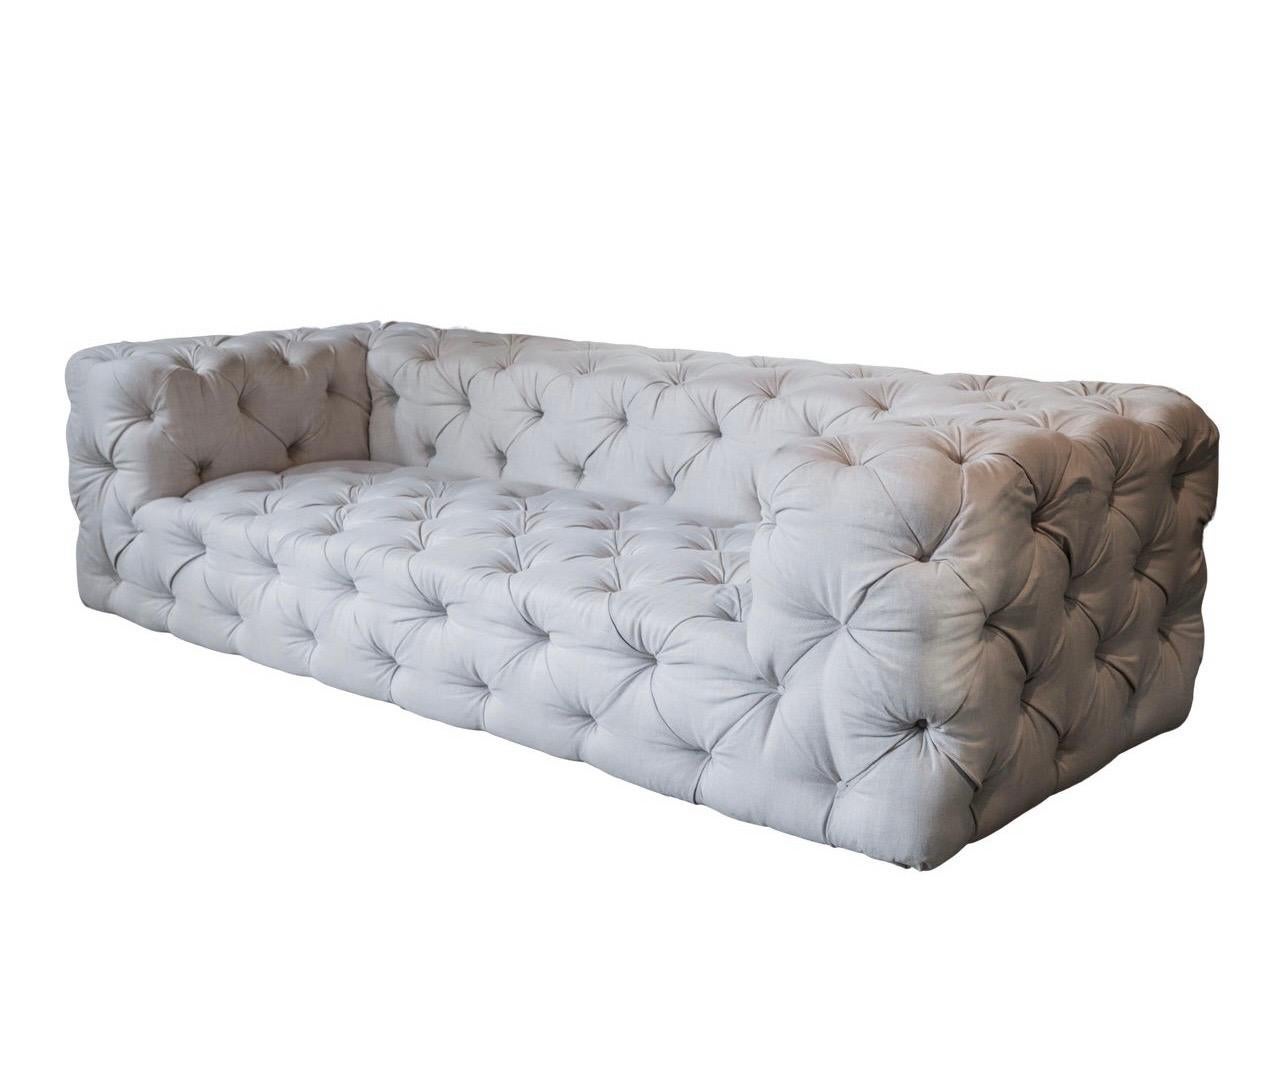 Large nine foot RH Soho fully tufted chesterfield sofa. Very good condition save for one on the armrest. Features squared off lines, low profile, and a sleek contemporary design that has made this piece one of RH's most sought after and, hence,